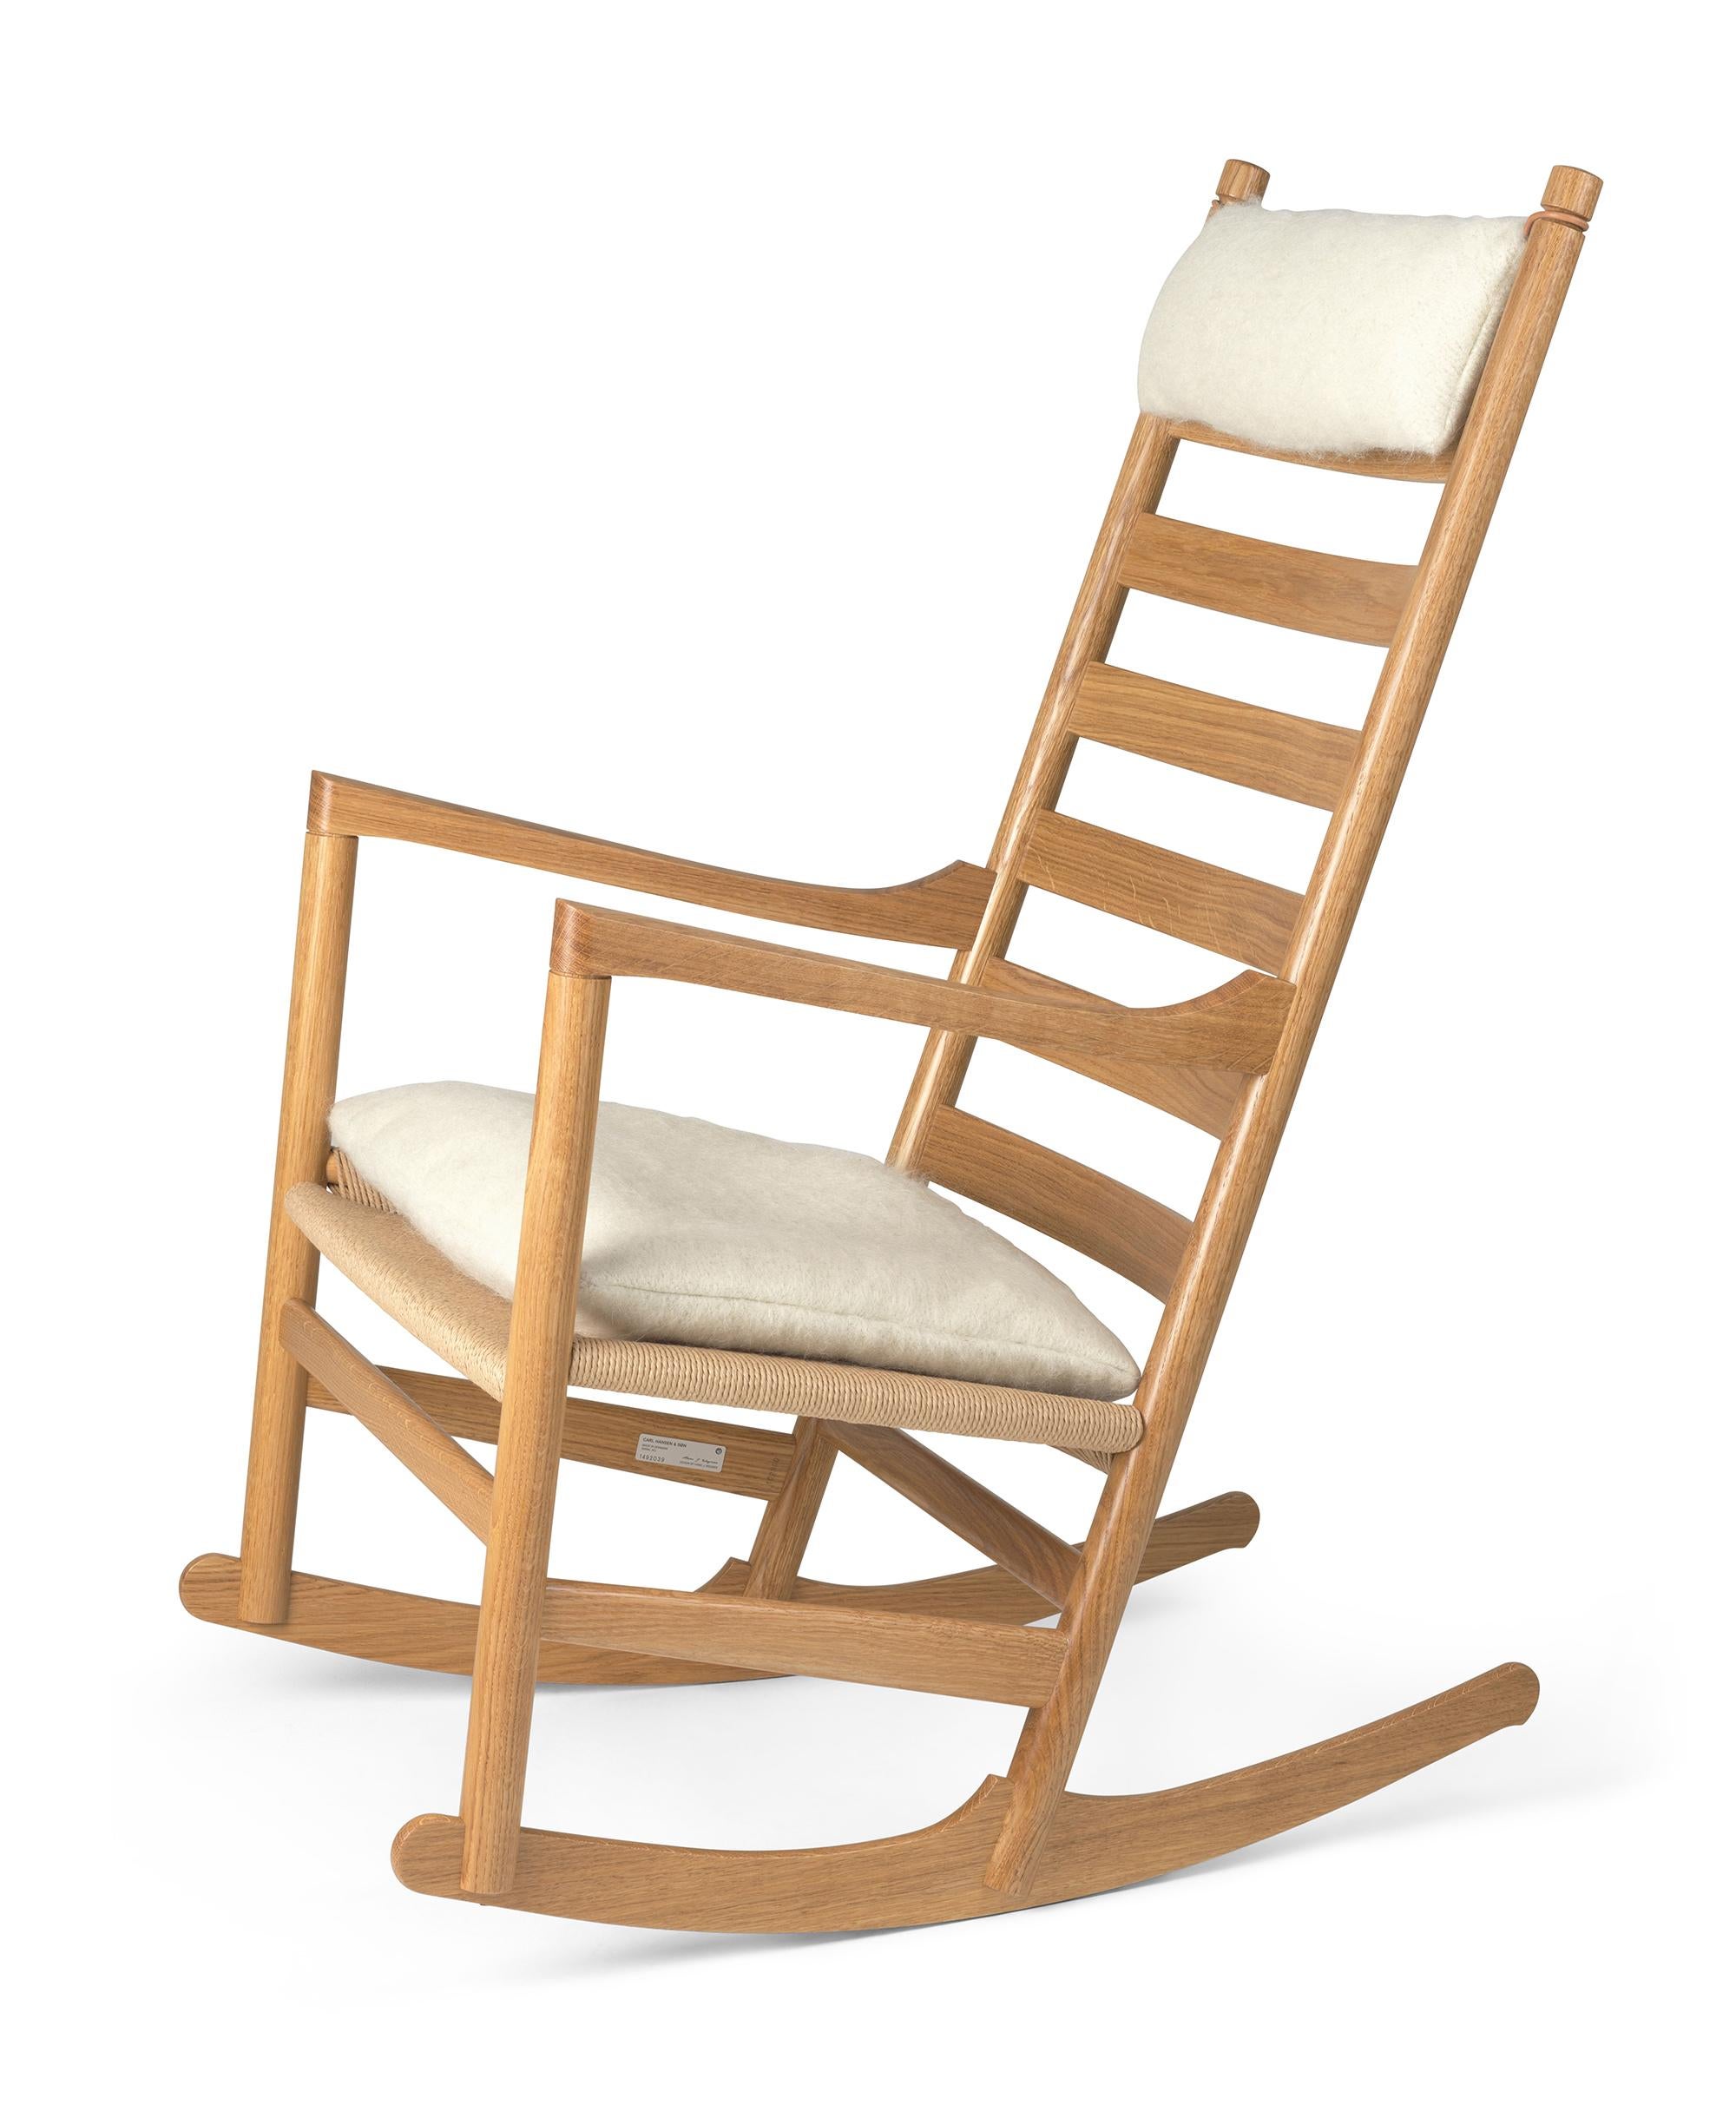 Hans J. Wegner 'CH45' Rocking Chair for Carl Hansen & Son in Oak Lacquer In New Condition For Sale In Glendale, CA